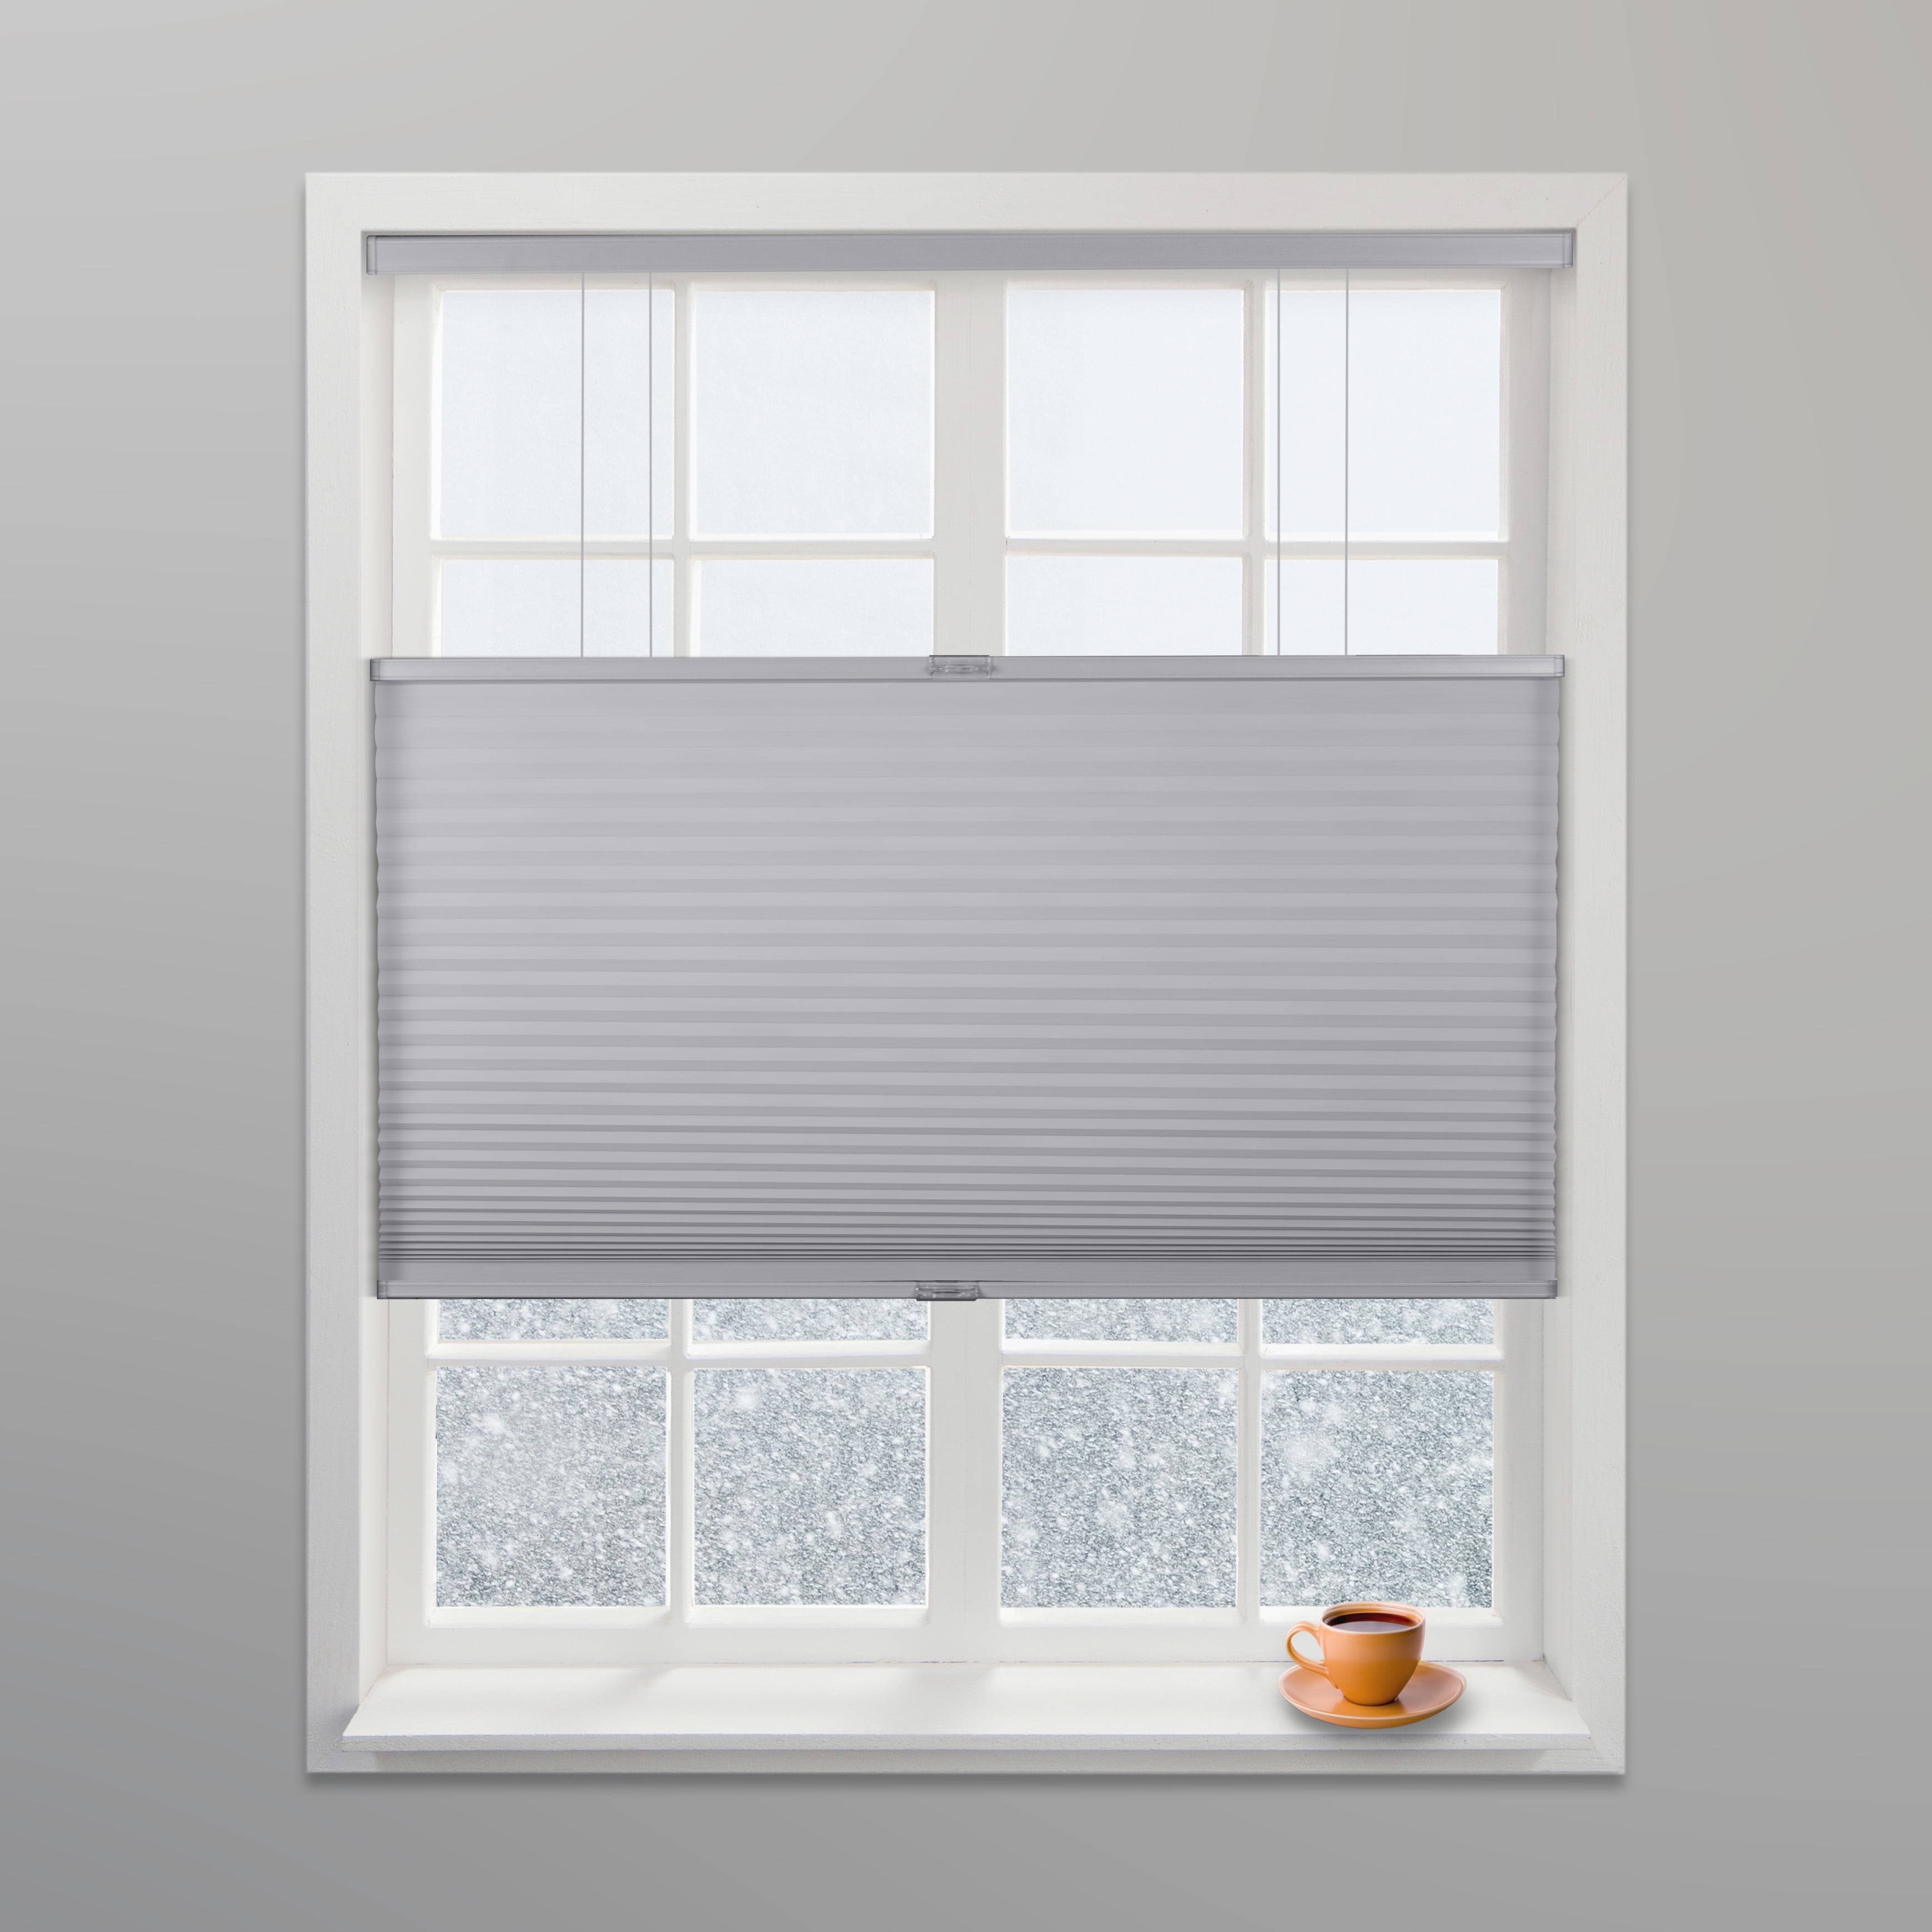 Frost White 16 1/2 W x 72 H MiLin Cordless Blackout Cellular Honeycomb Shades Top Down Bottom Up One Week Fast Delivery Bedroom Kitchen Window Blinds and Shades Custom Cut to Size